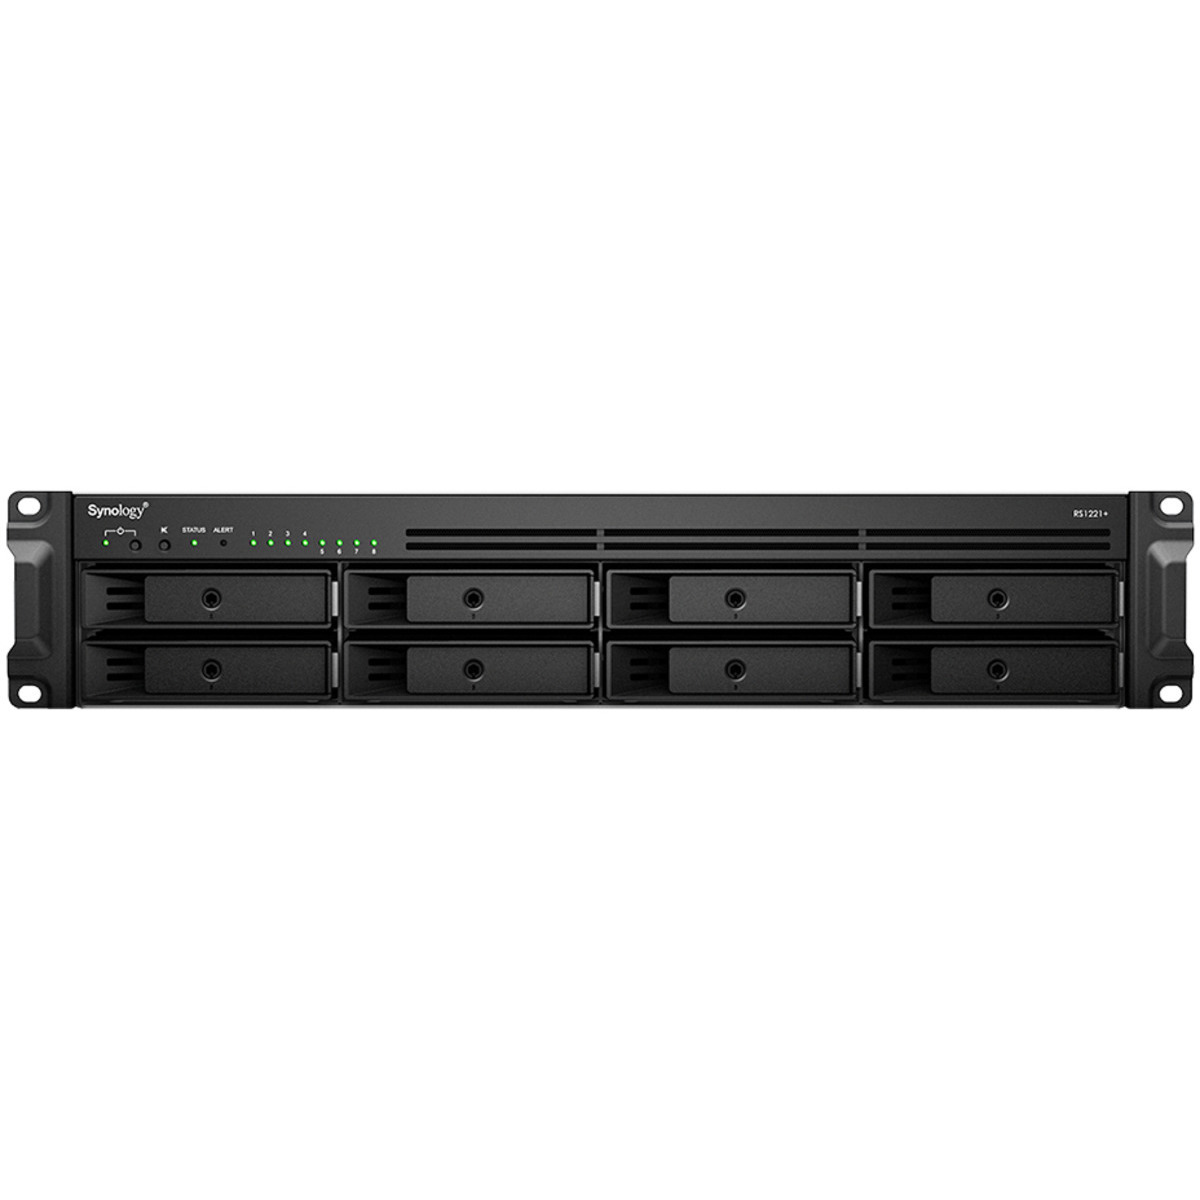 Synology RackStation RS1221+ 56tb 8-Bay RackMount Multimedia / Power User / Business NAS - Network Attached Storage Device 7x8tb Seagate BarraCuda ST8000DM004 3.5 5400rpm SATA 6Gb/s HDD CONSUMER Class Drives Installed - Burn-In Tested RackStation RS1221+